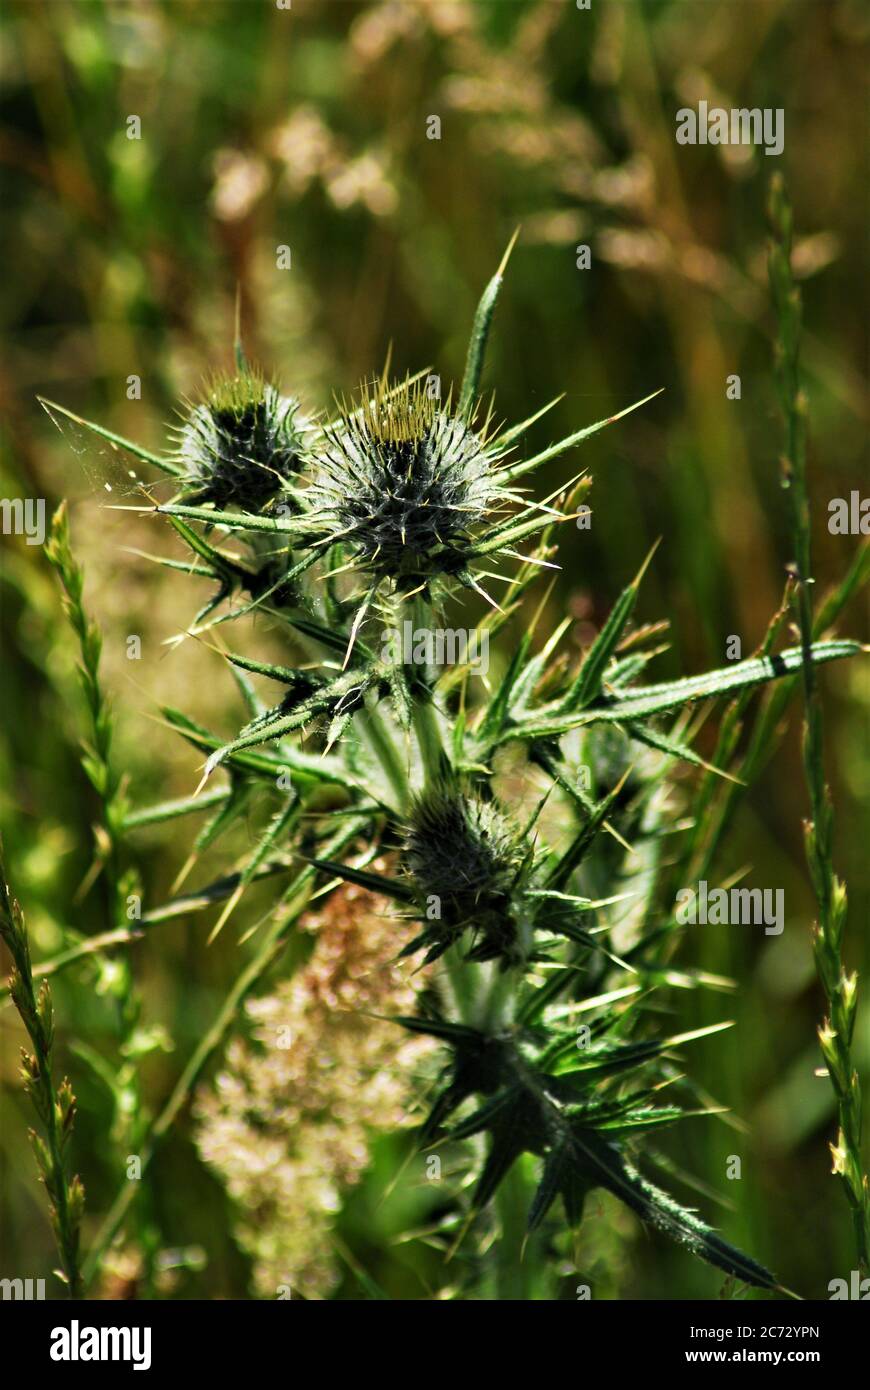 Green thistle against a brown green background Stock Photo